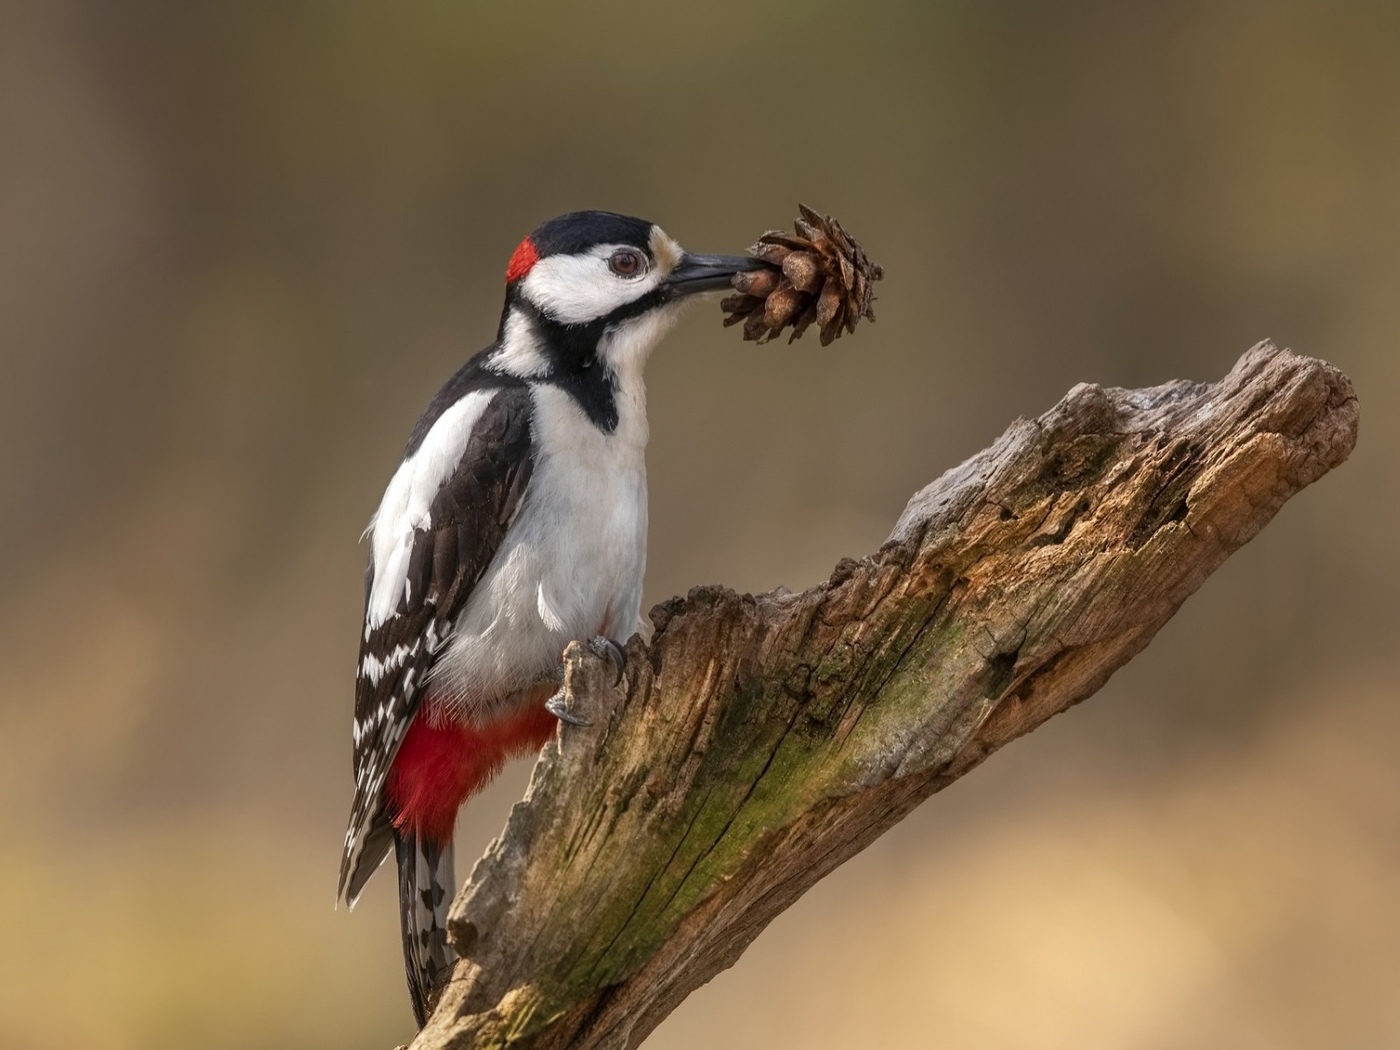  Woodpeckers also love nuts